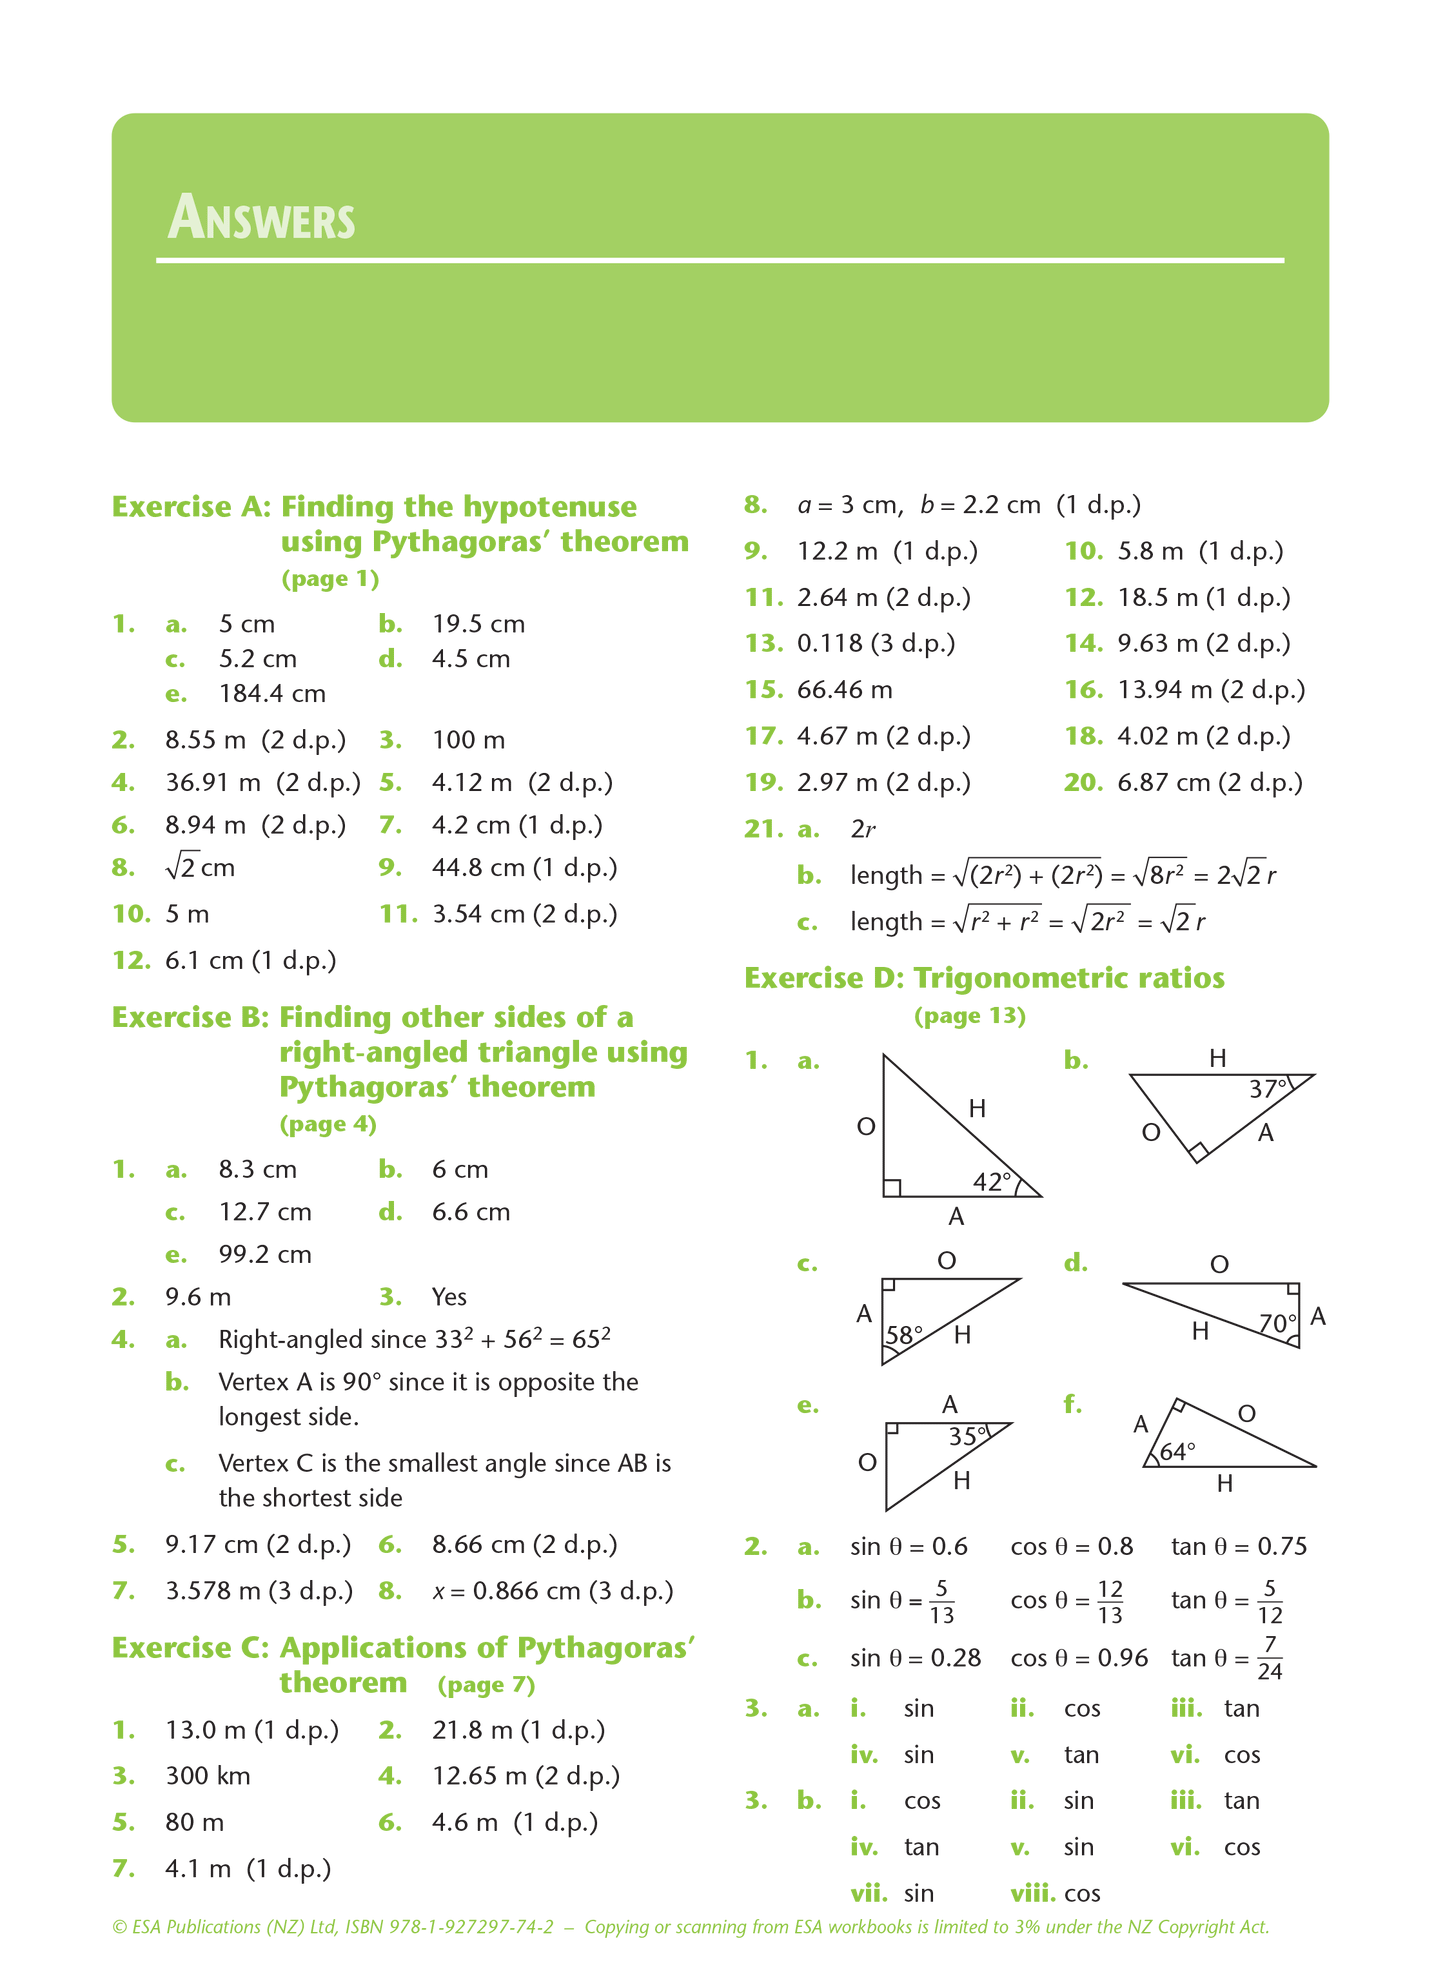 Level 1 Right-angled Triangles 1.7 Learning Workbook